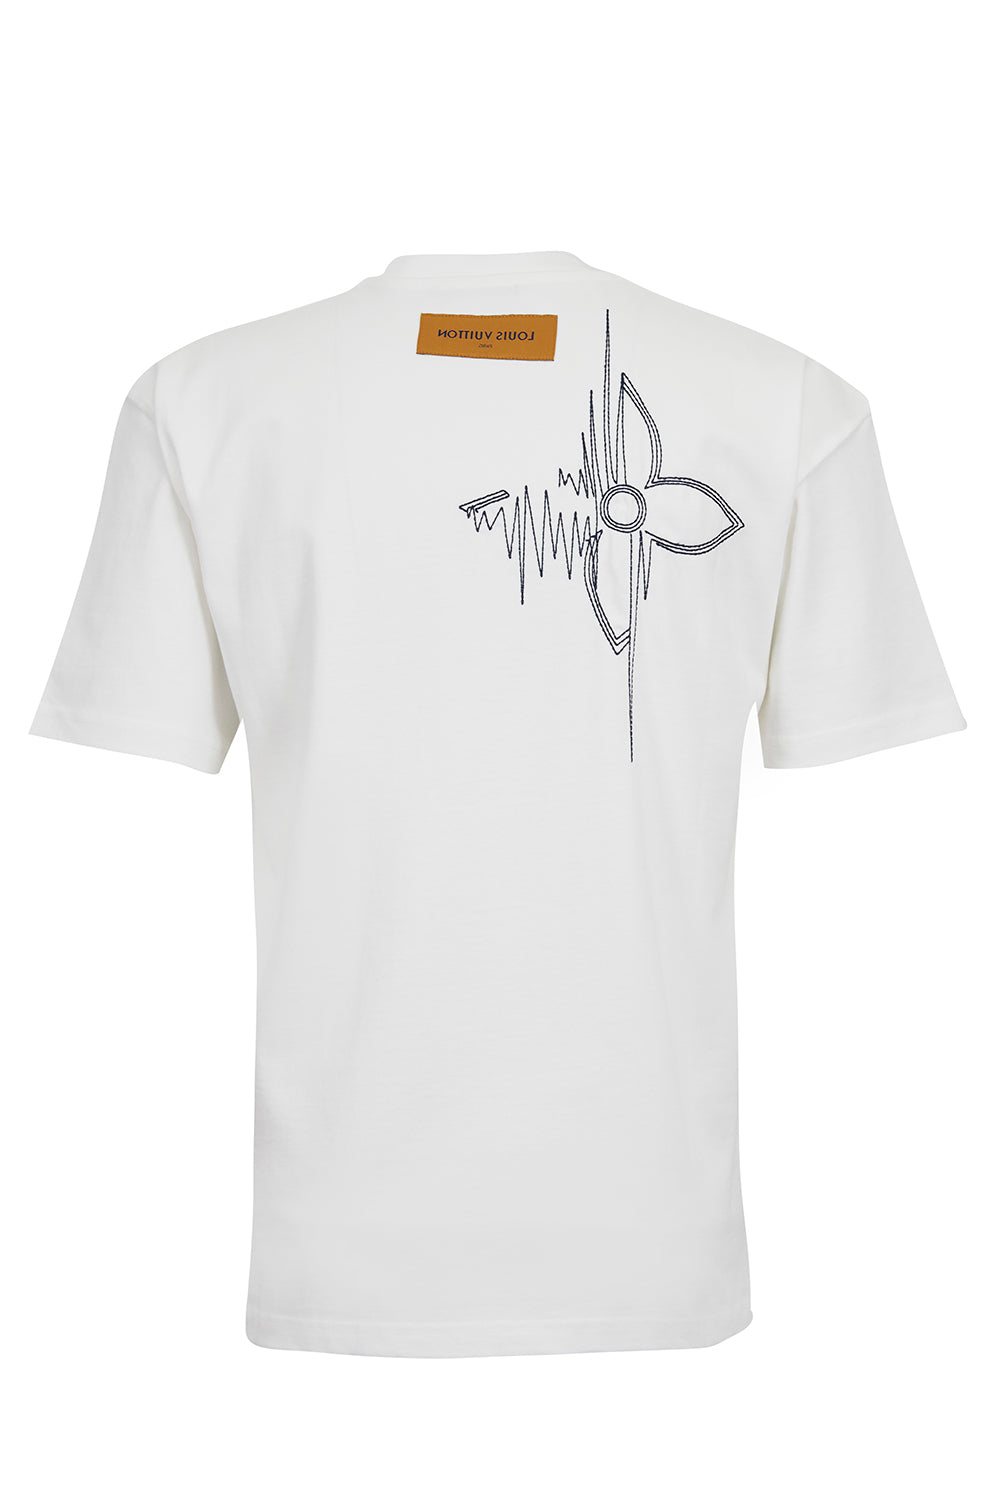 LOUIS VUITTON LV FREQUENCY GRAPHIC WHITE T-SHIRT – e-Outlet